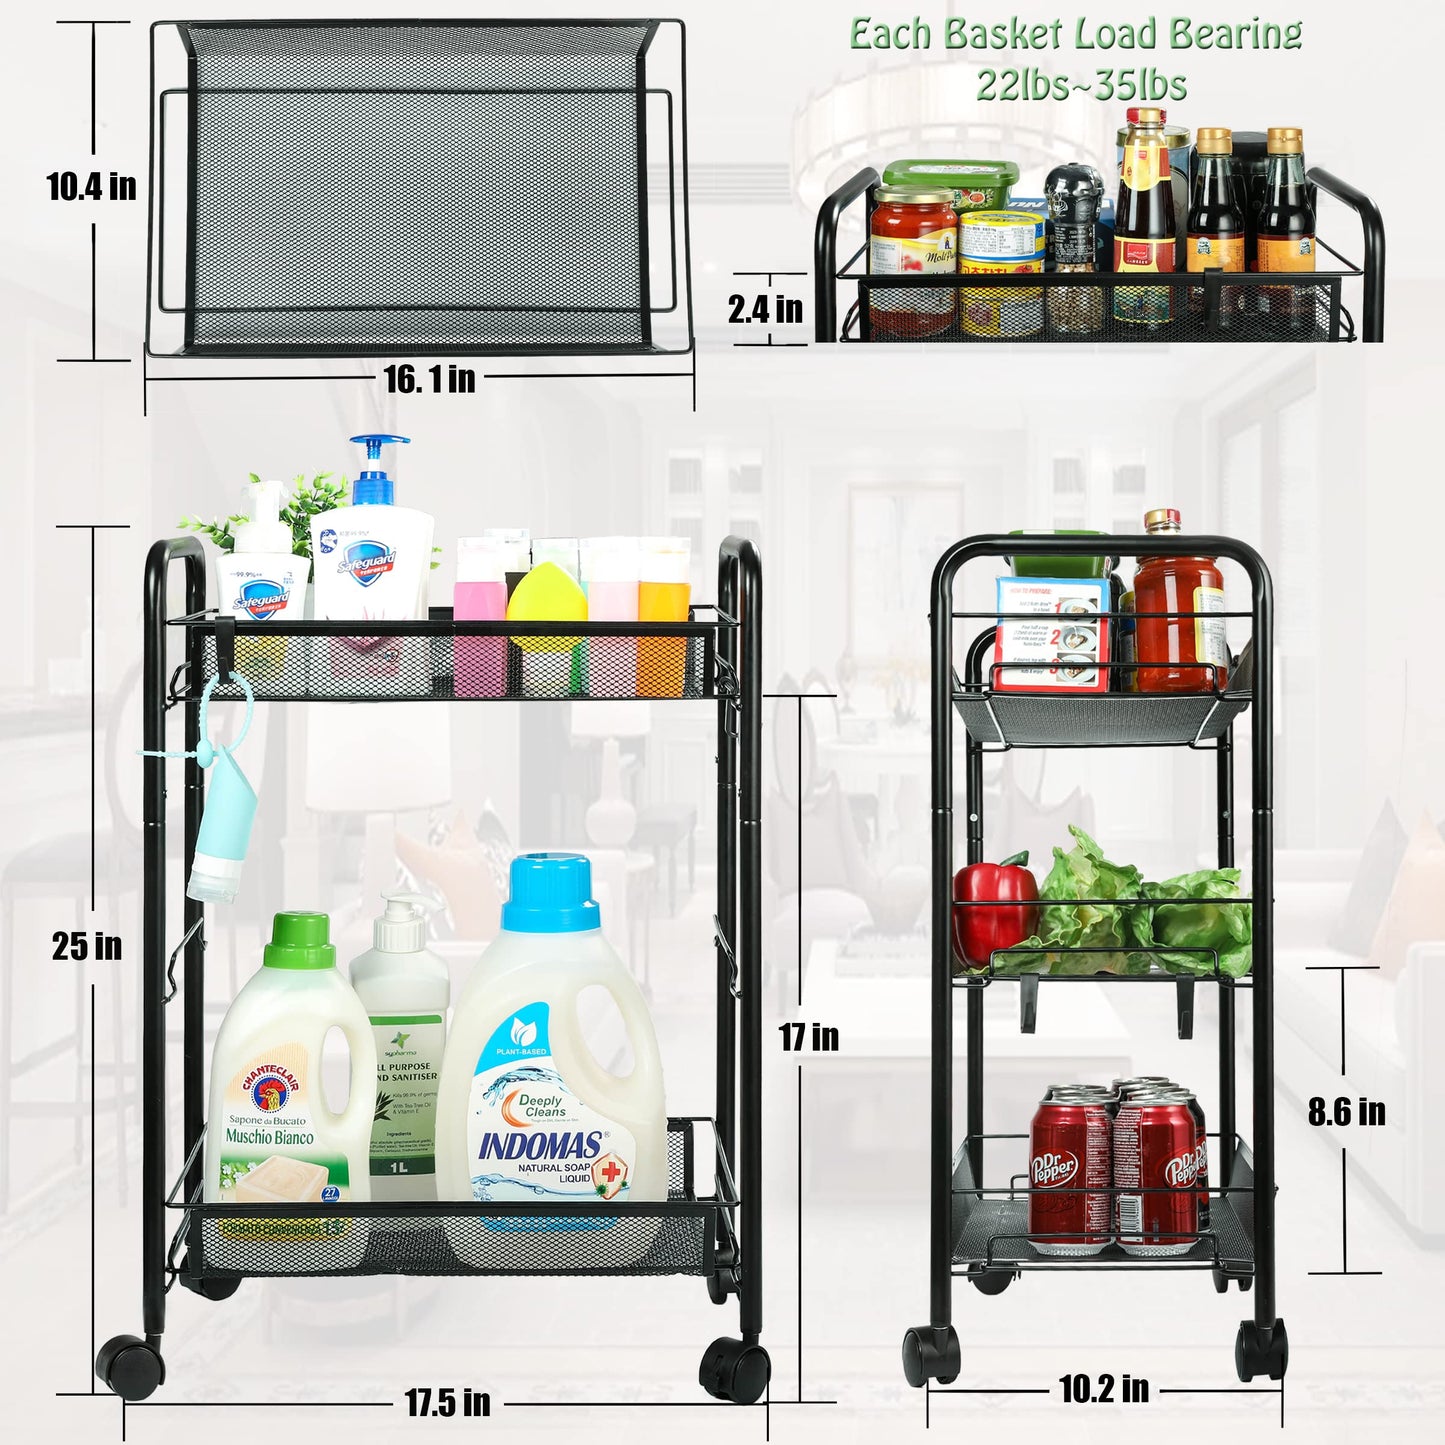 3 Tier All-Metal Rolling Cart, Trolley Craft Cart with Locking Wheels, Easy-Carry and Assembly Mesh Trolley Cart with 1 Small Baskets and 4 Hooks for Bathroom Kitchen Office Balcony Living Room